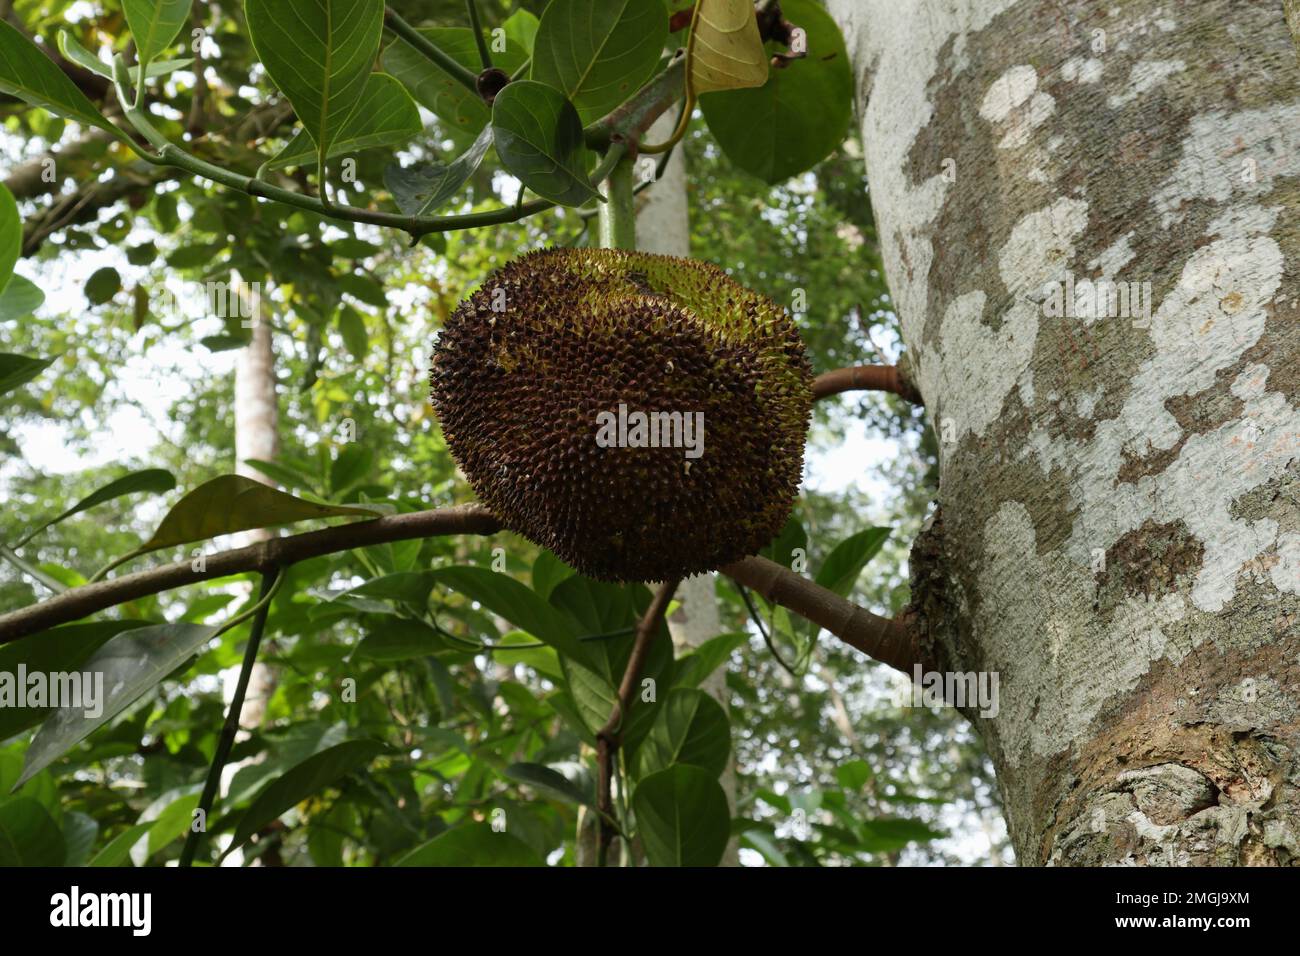 Low angle view of a Jack fruit with a some form of disease. The Jack fruit is hanging from the branch on jack tree trunk Stock Photo